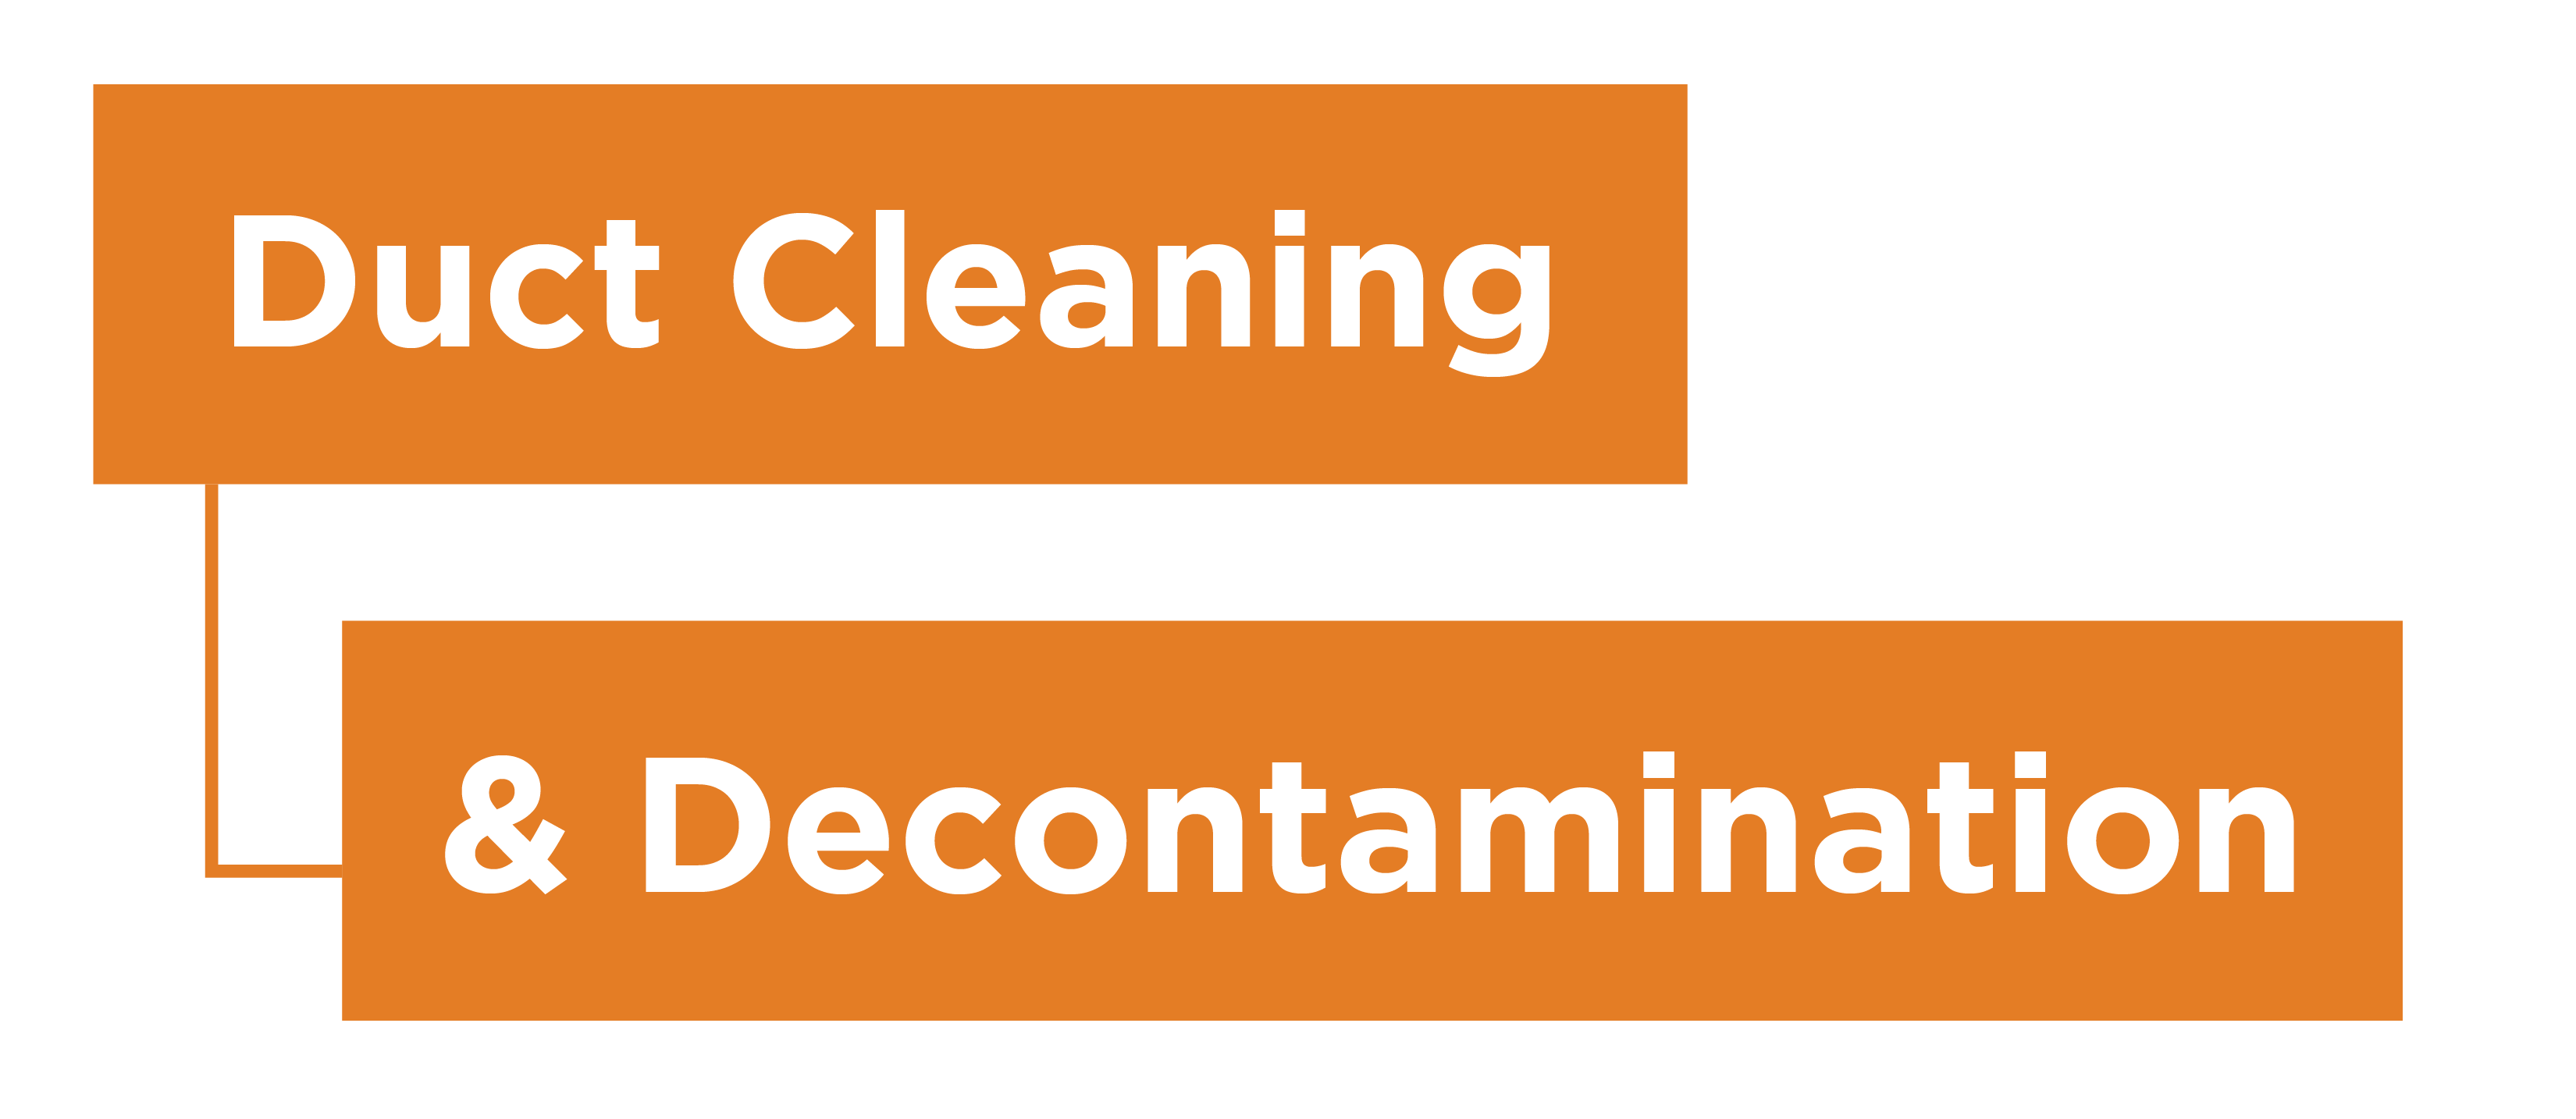 duct cleaning and decontamination